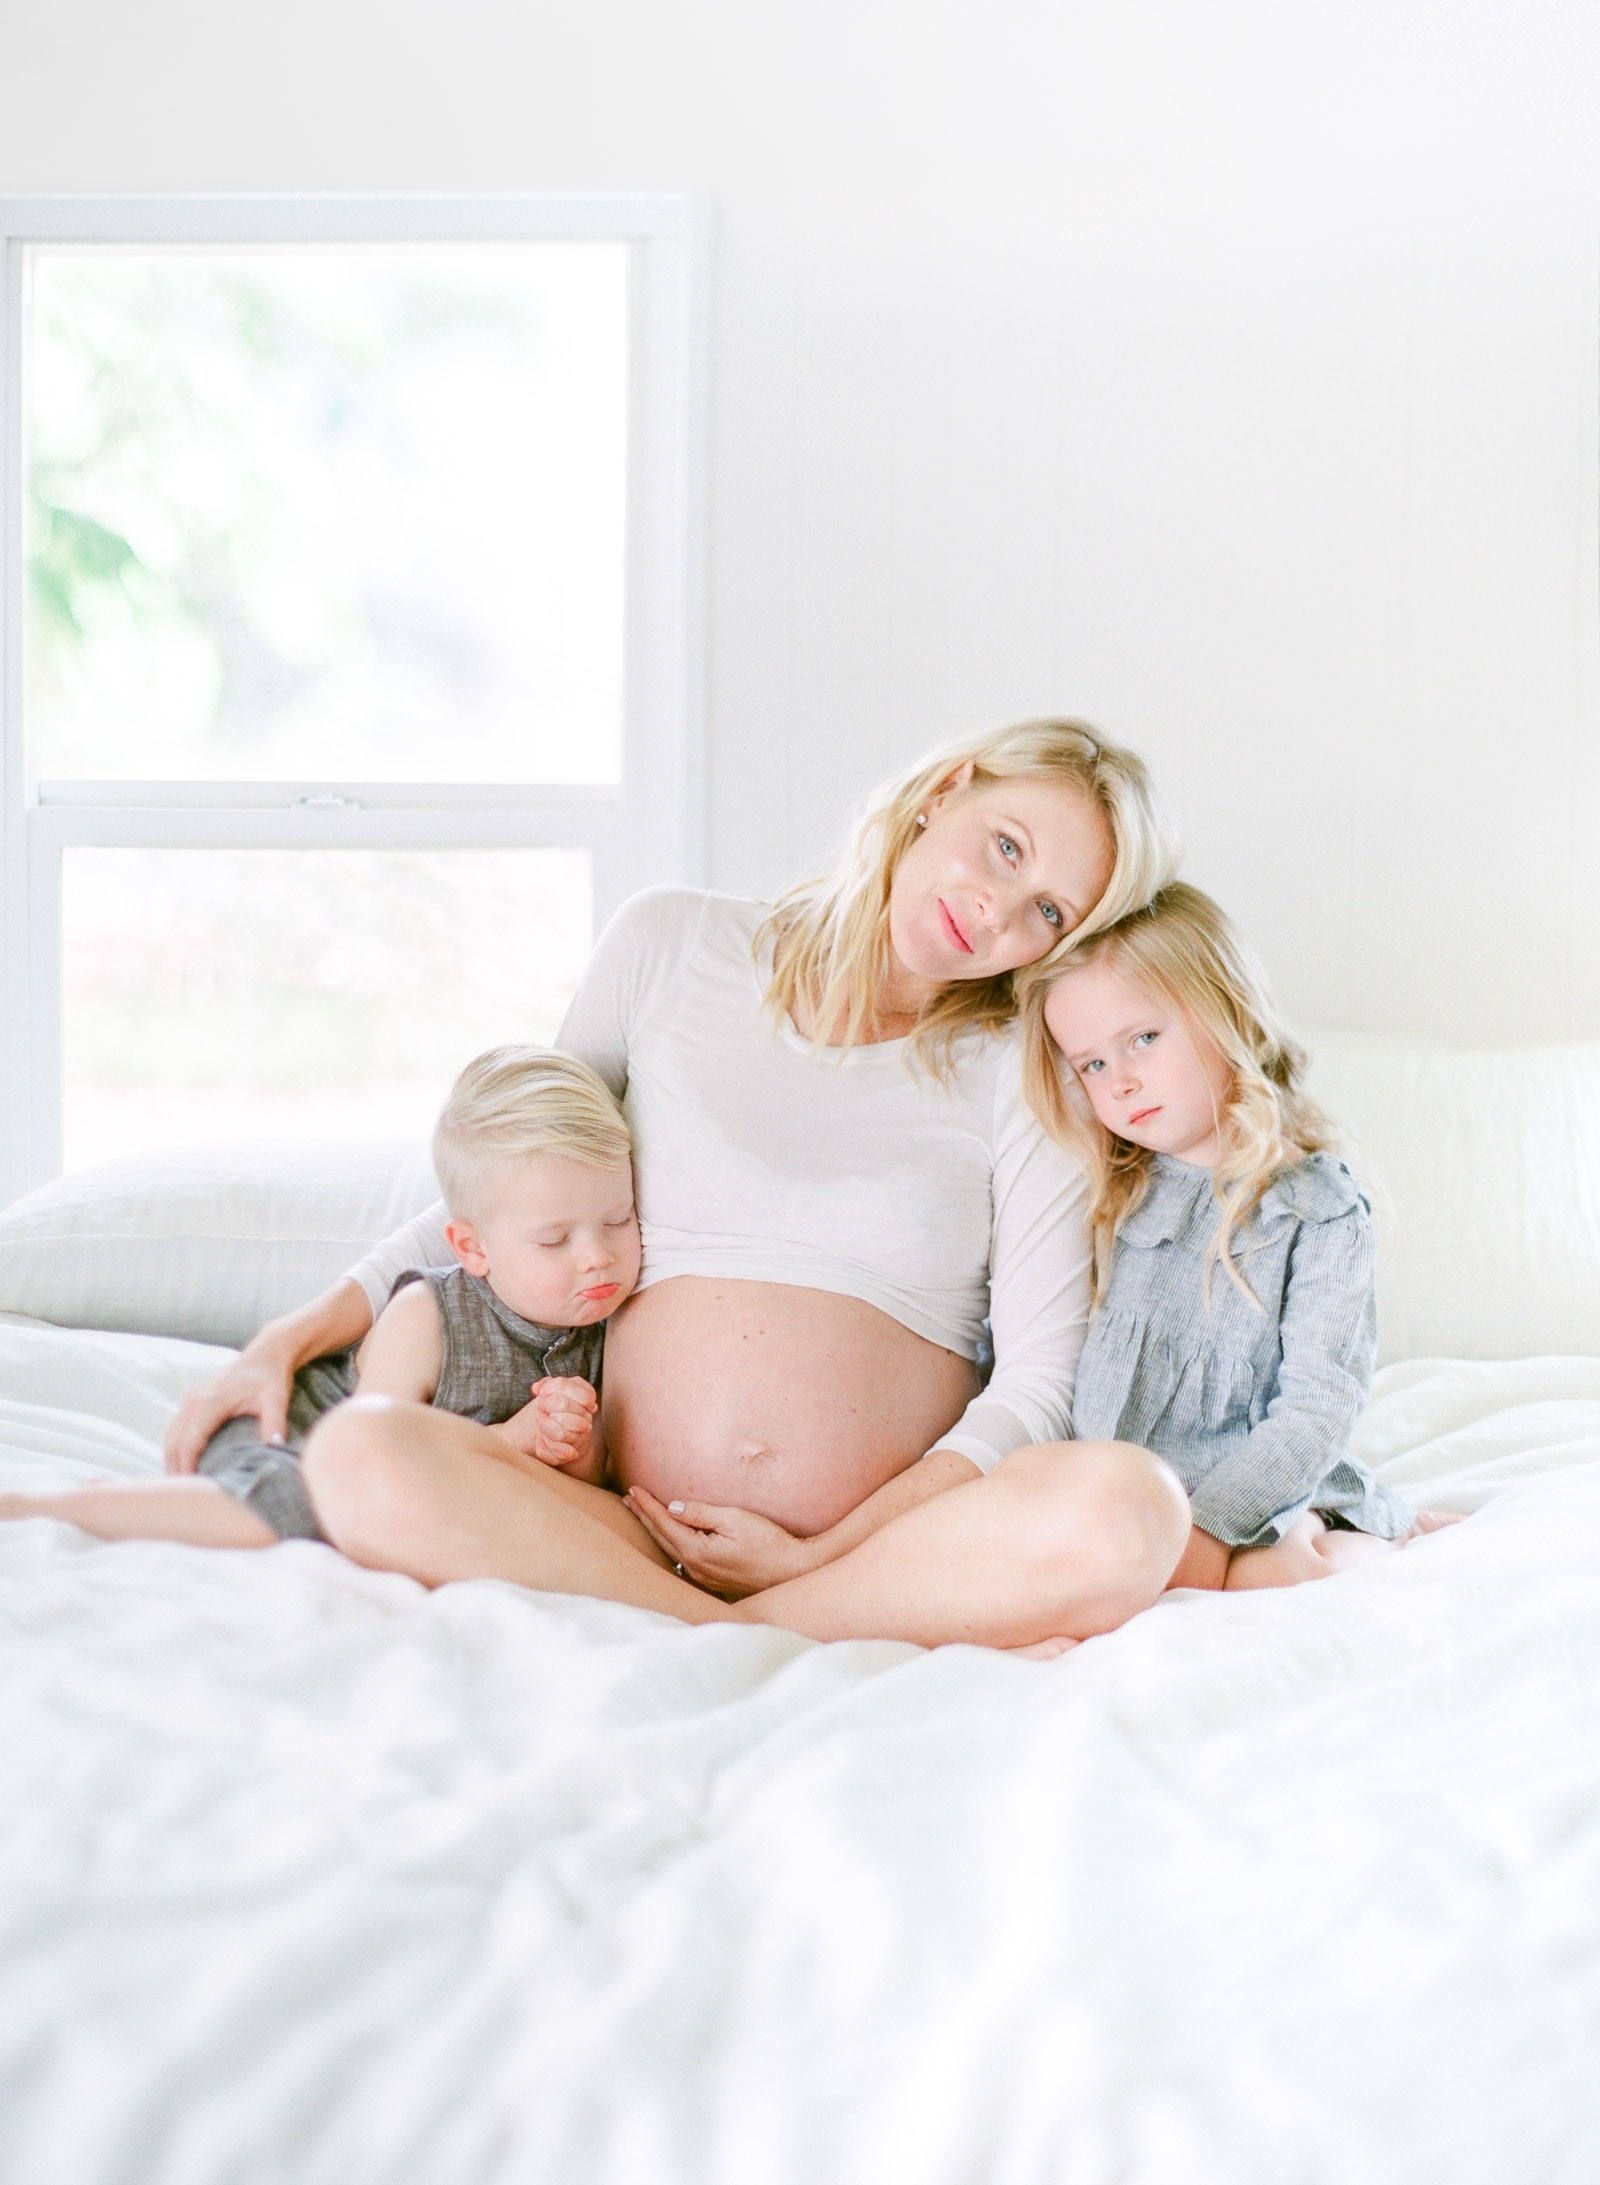 san francisco bay area maternity photography on film central valley maternity session on film kent avenue photography